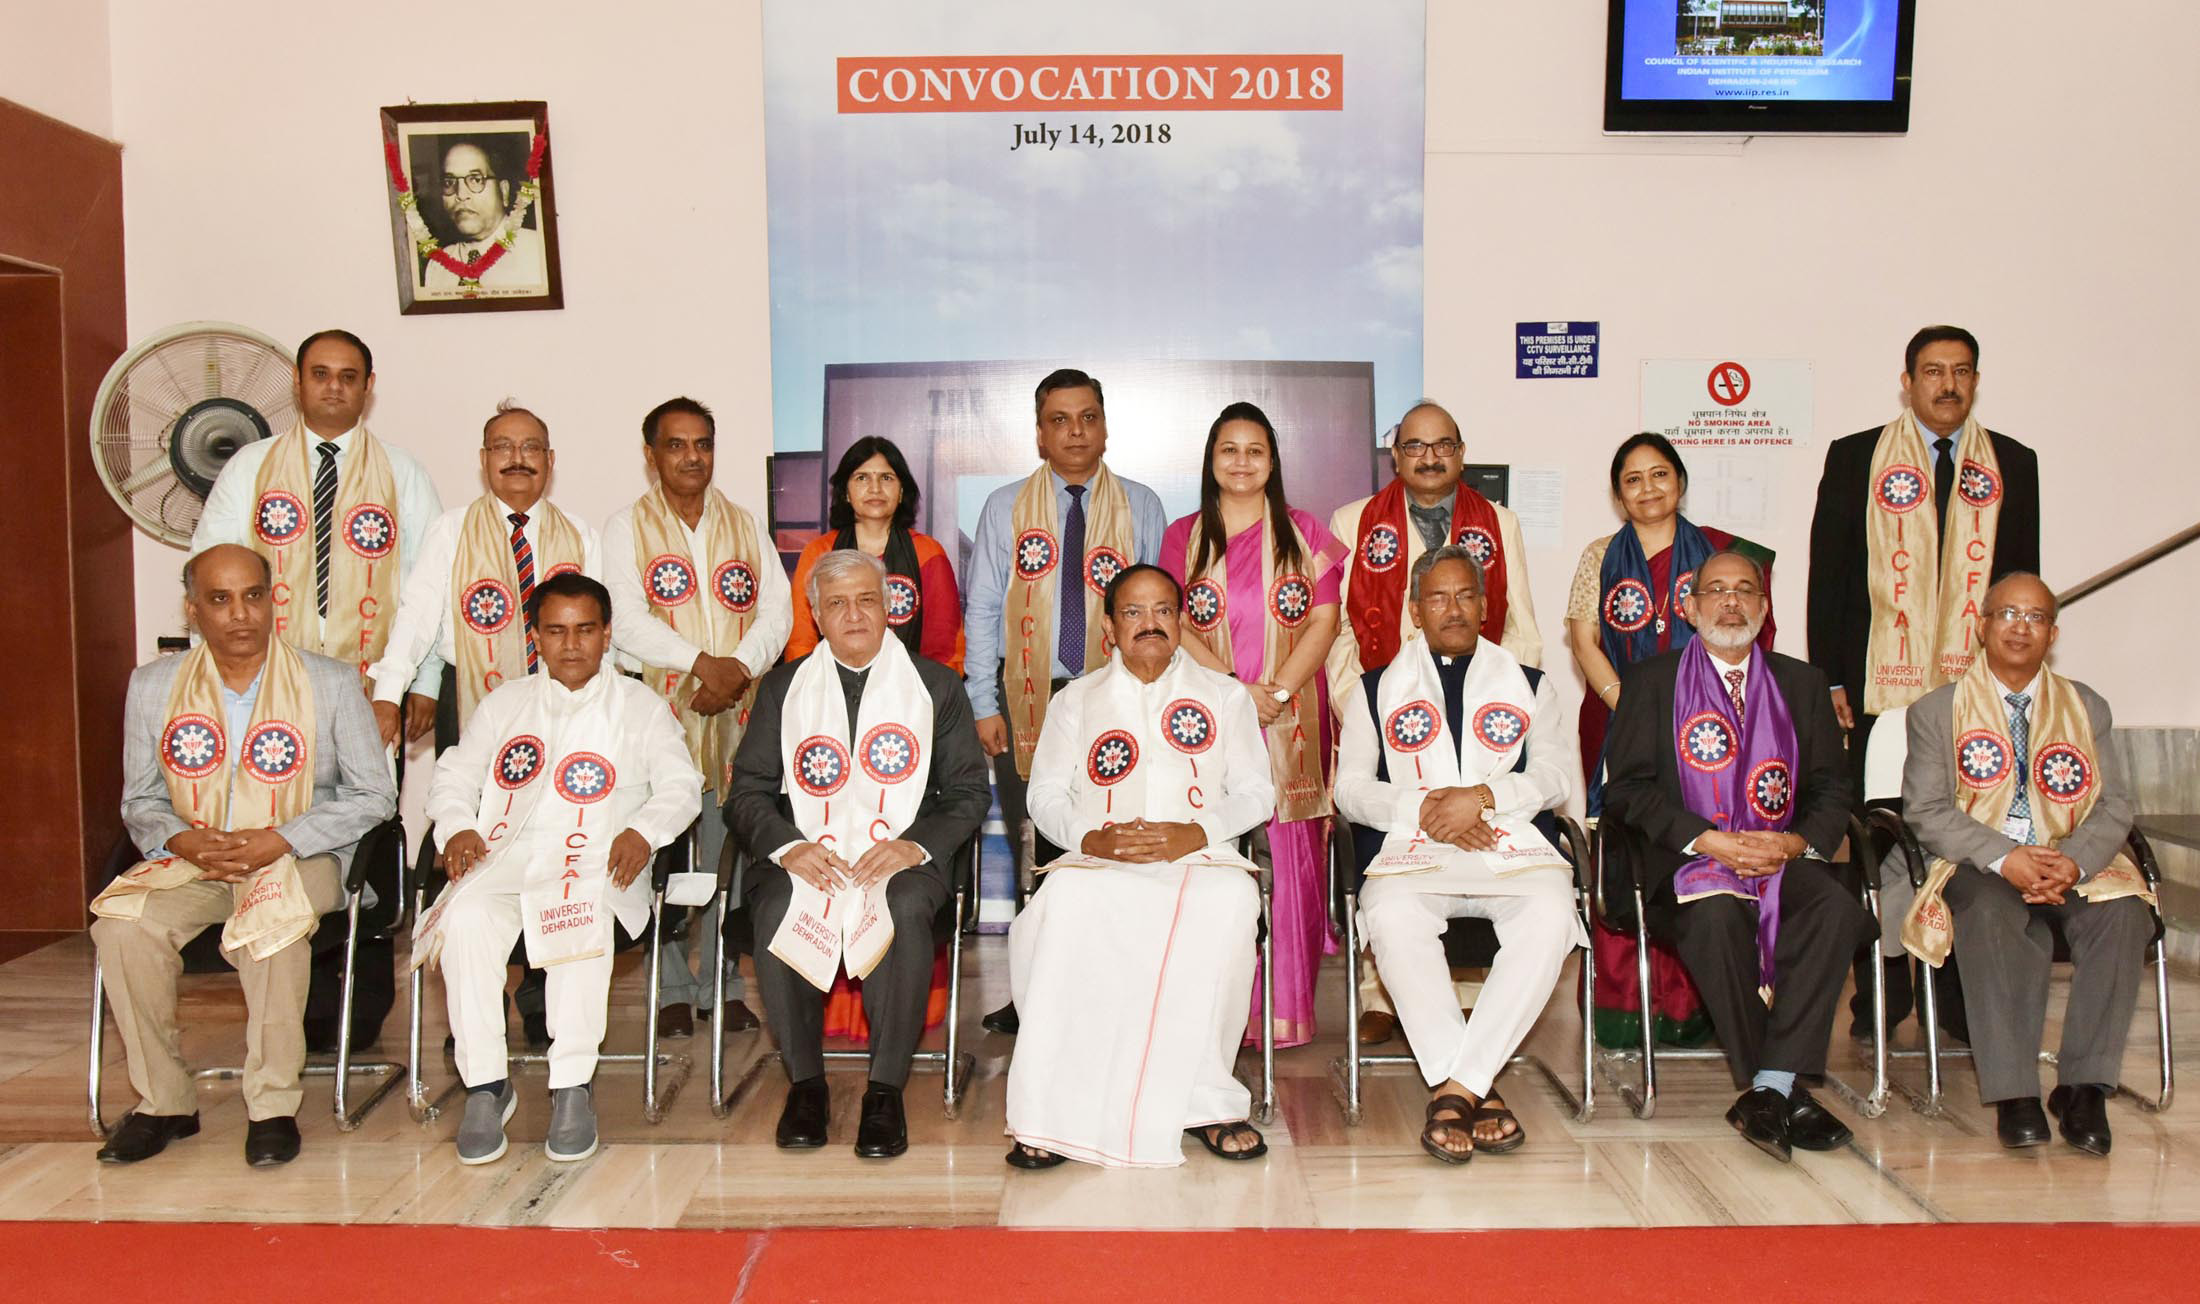 The Vice President, Shri M. Venkaiah Naidu with the faculty members of The ICFAI University, in Dehradun, Uttarakhand on July 14, 2018. The Governor of Uttarakhand, Shri Krishan Kant Paul, the Chief Minister of Uttarakhand, Shri Trivendra Singh Rawat and other dignitaries are also seen.